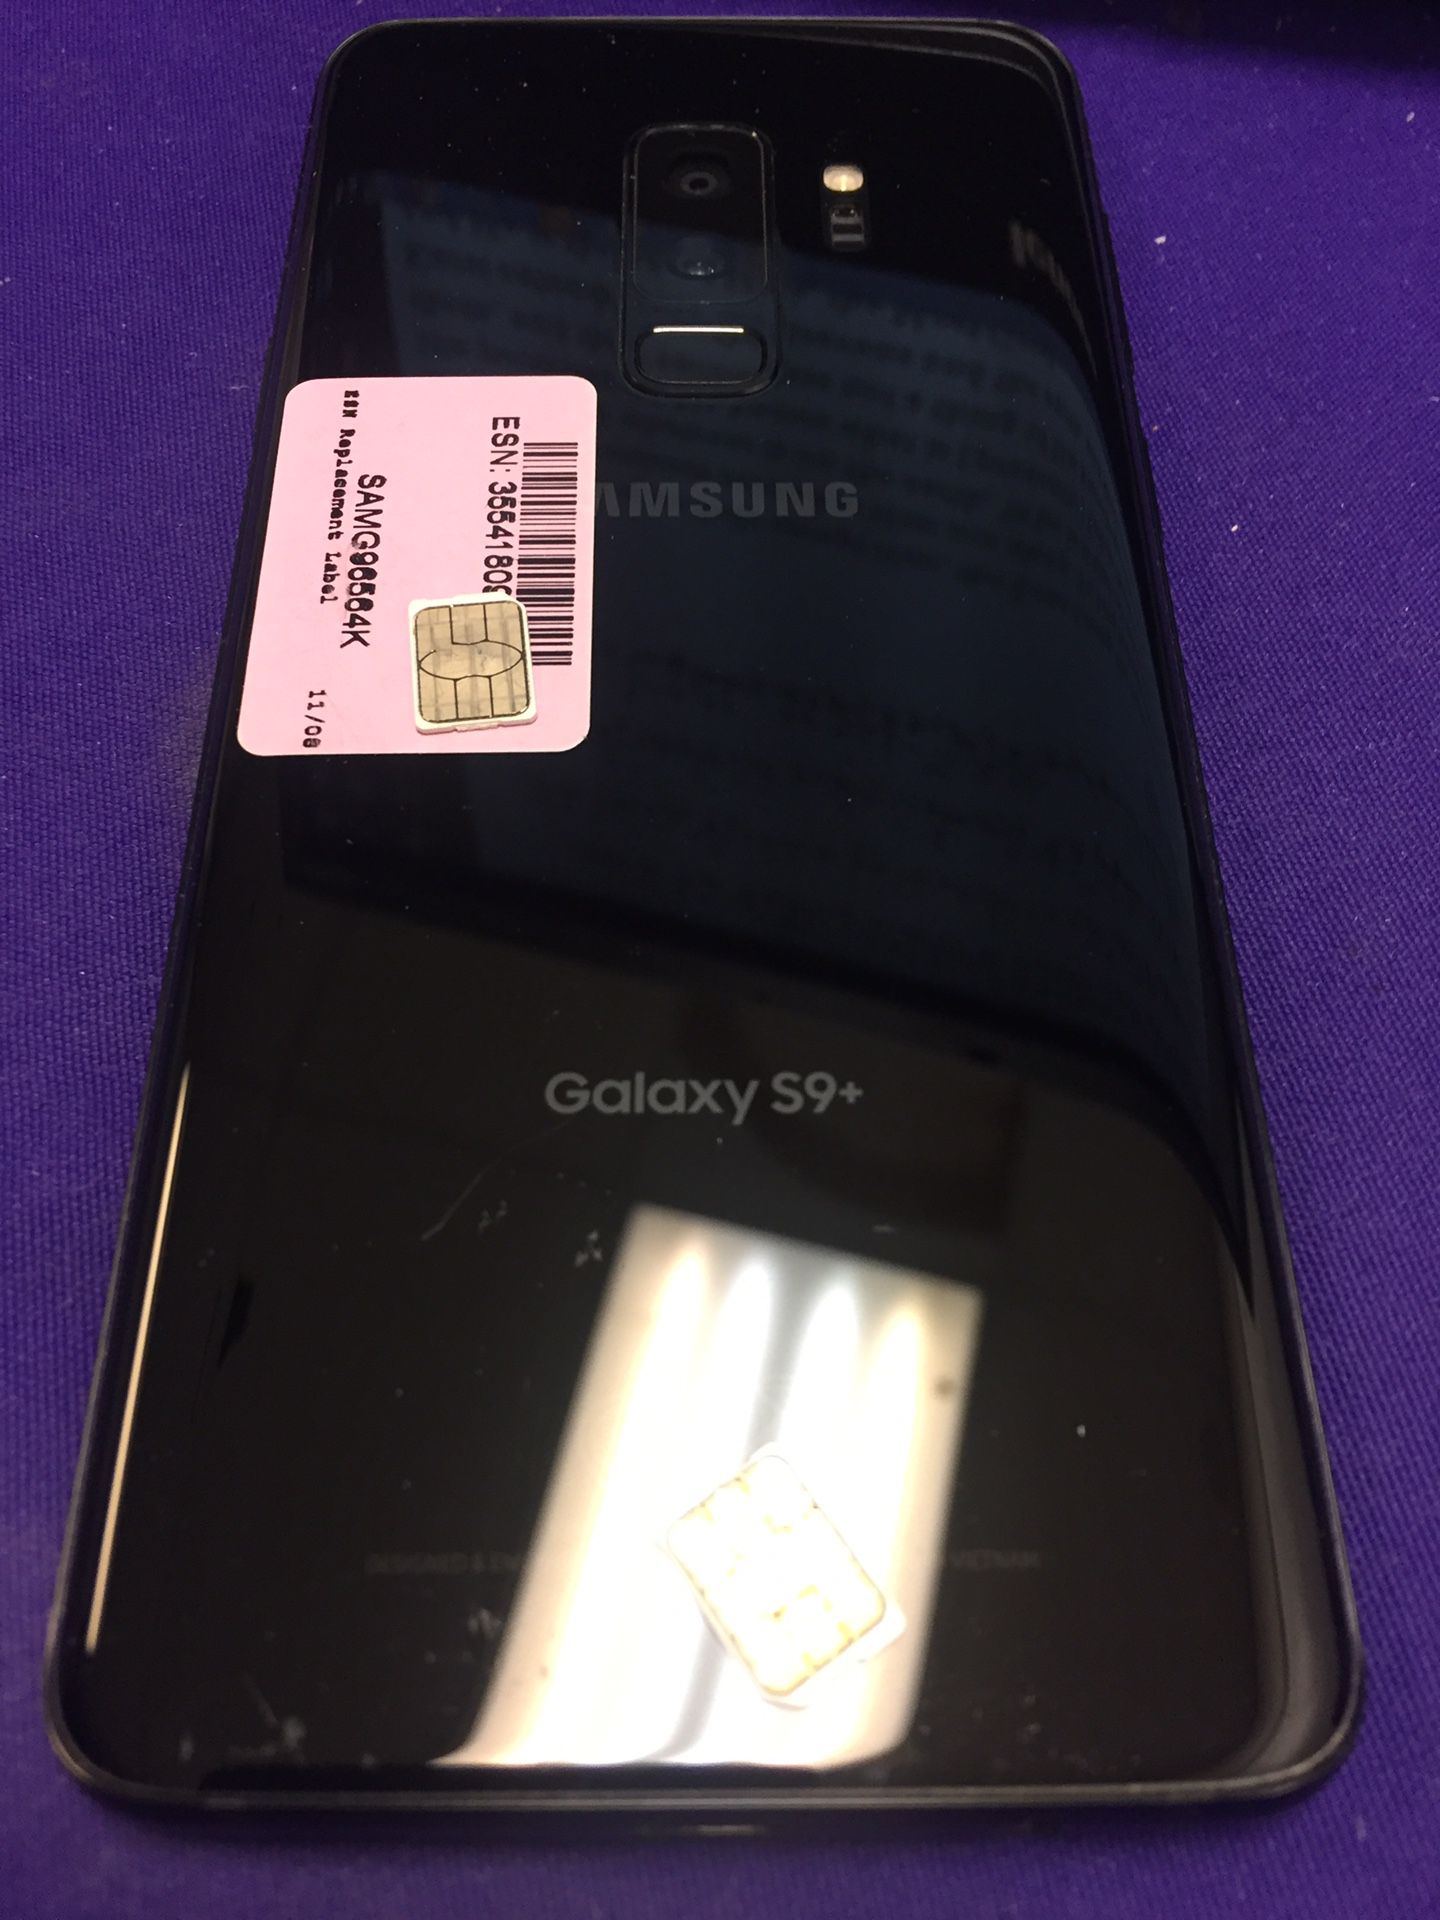 Now in stock Galaxy S9 Plus unlocked with charger and warranty!